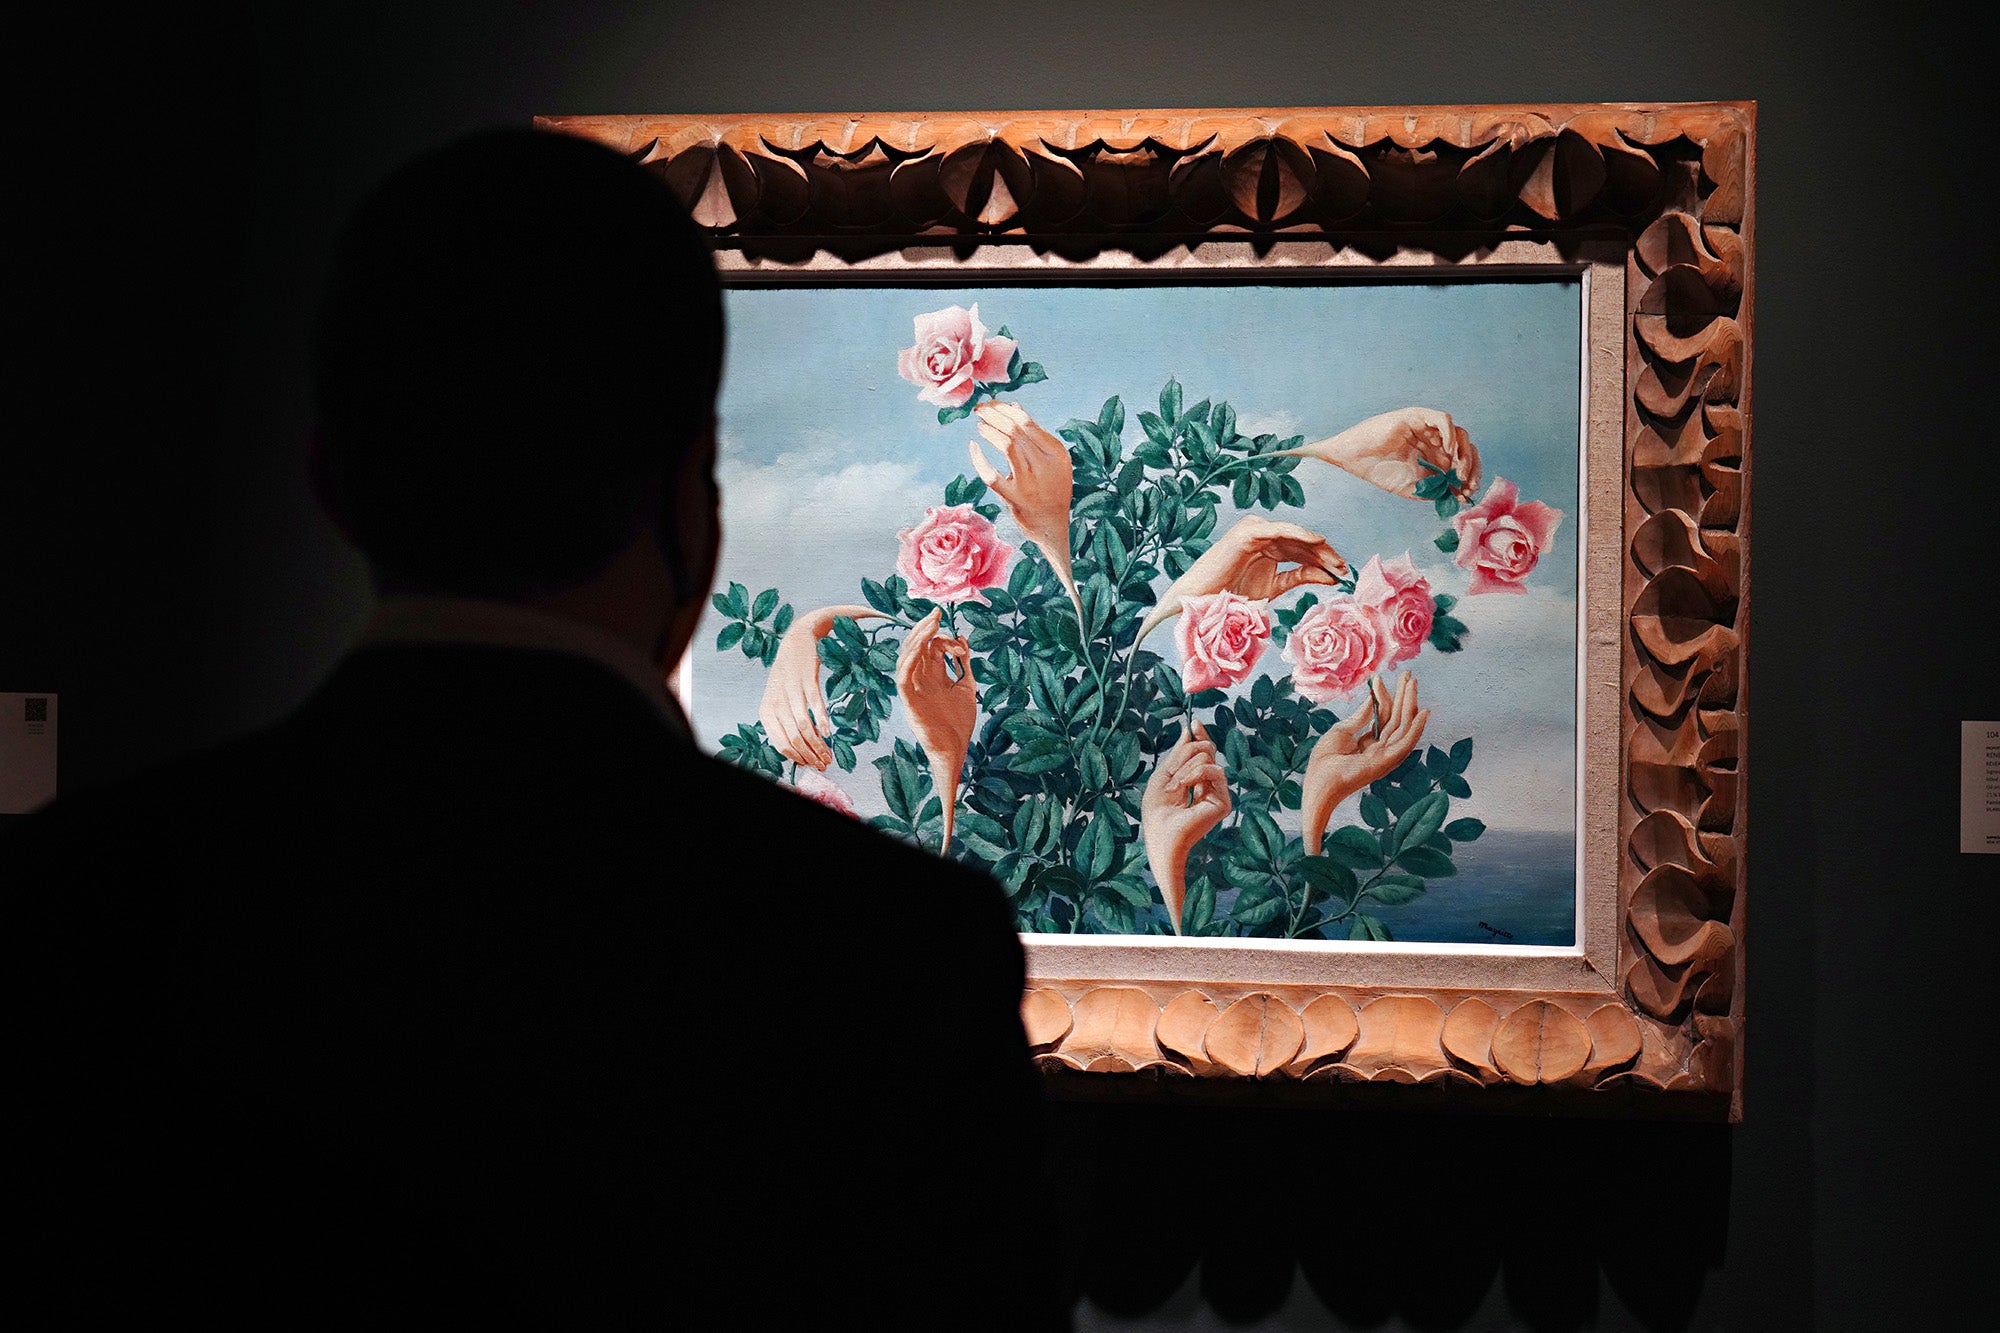 A person wearing a protective mask looks at "Rêverie de Monsieur James" by René Magritte during a press preview of the upcoming Impressionist and Modern Art Evening Sale at Sotheby's on October 23, 2020 in New York City. (Photo by Cindy Ord/Getty Images)